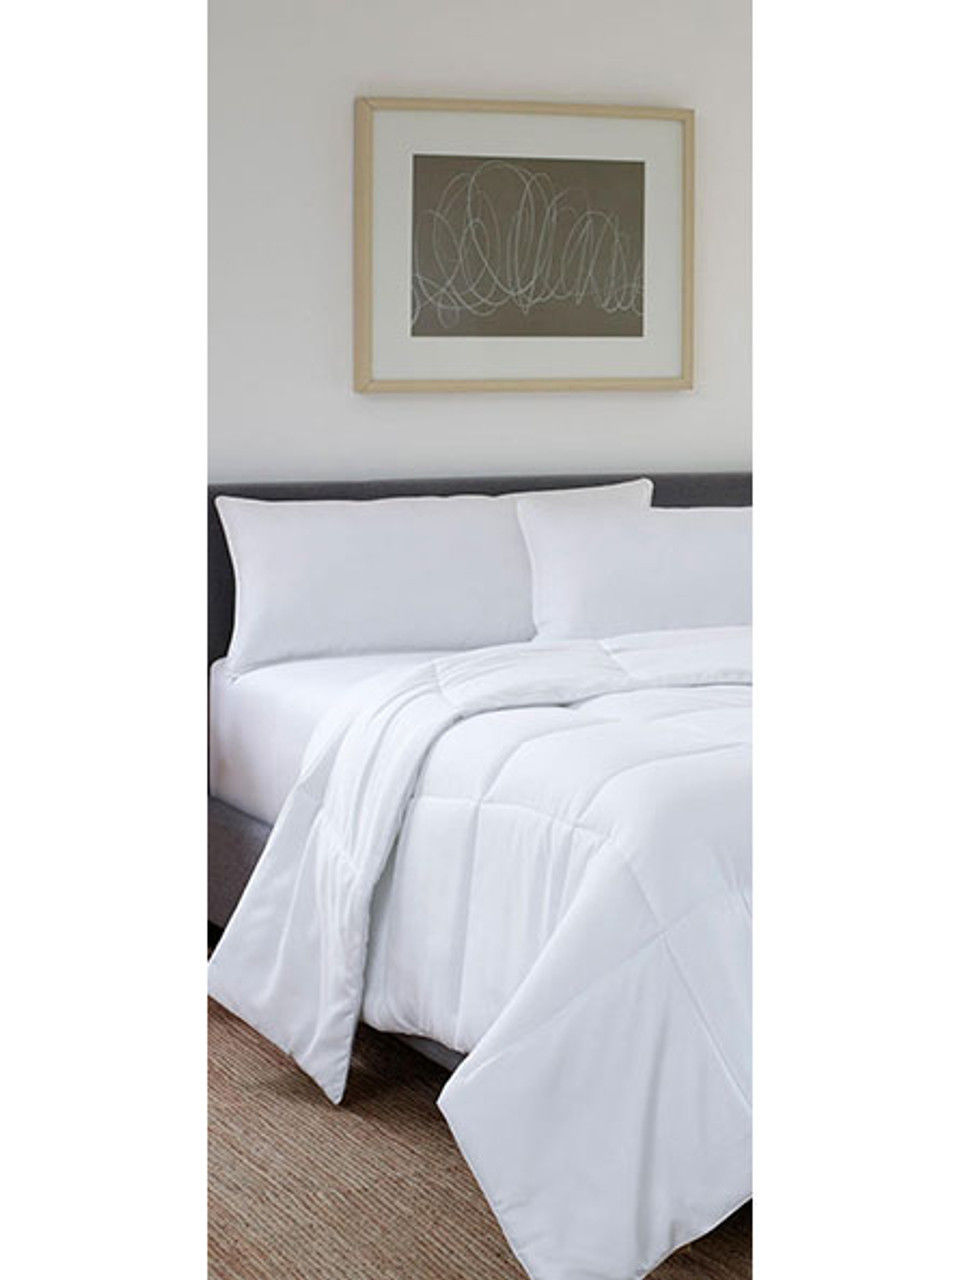 What fabric is used for the alternative down pillow cover?